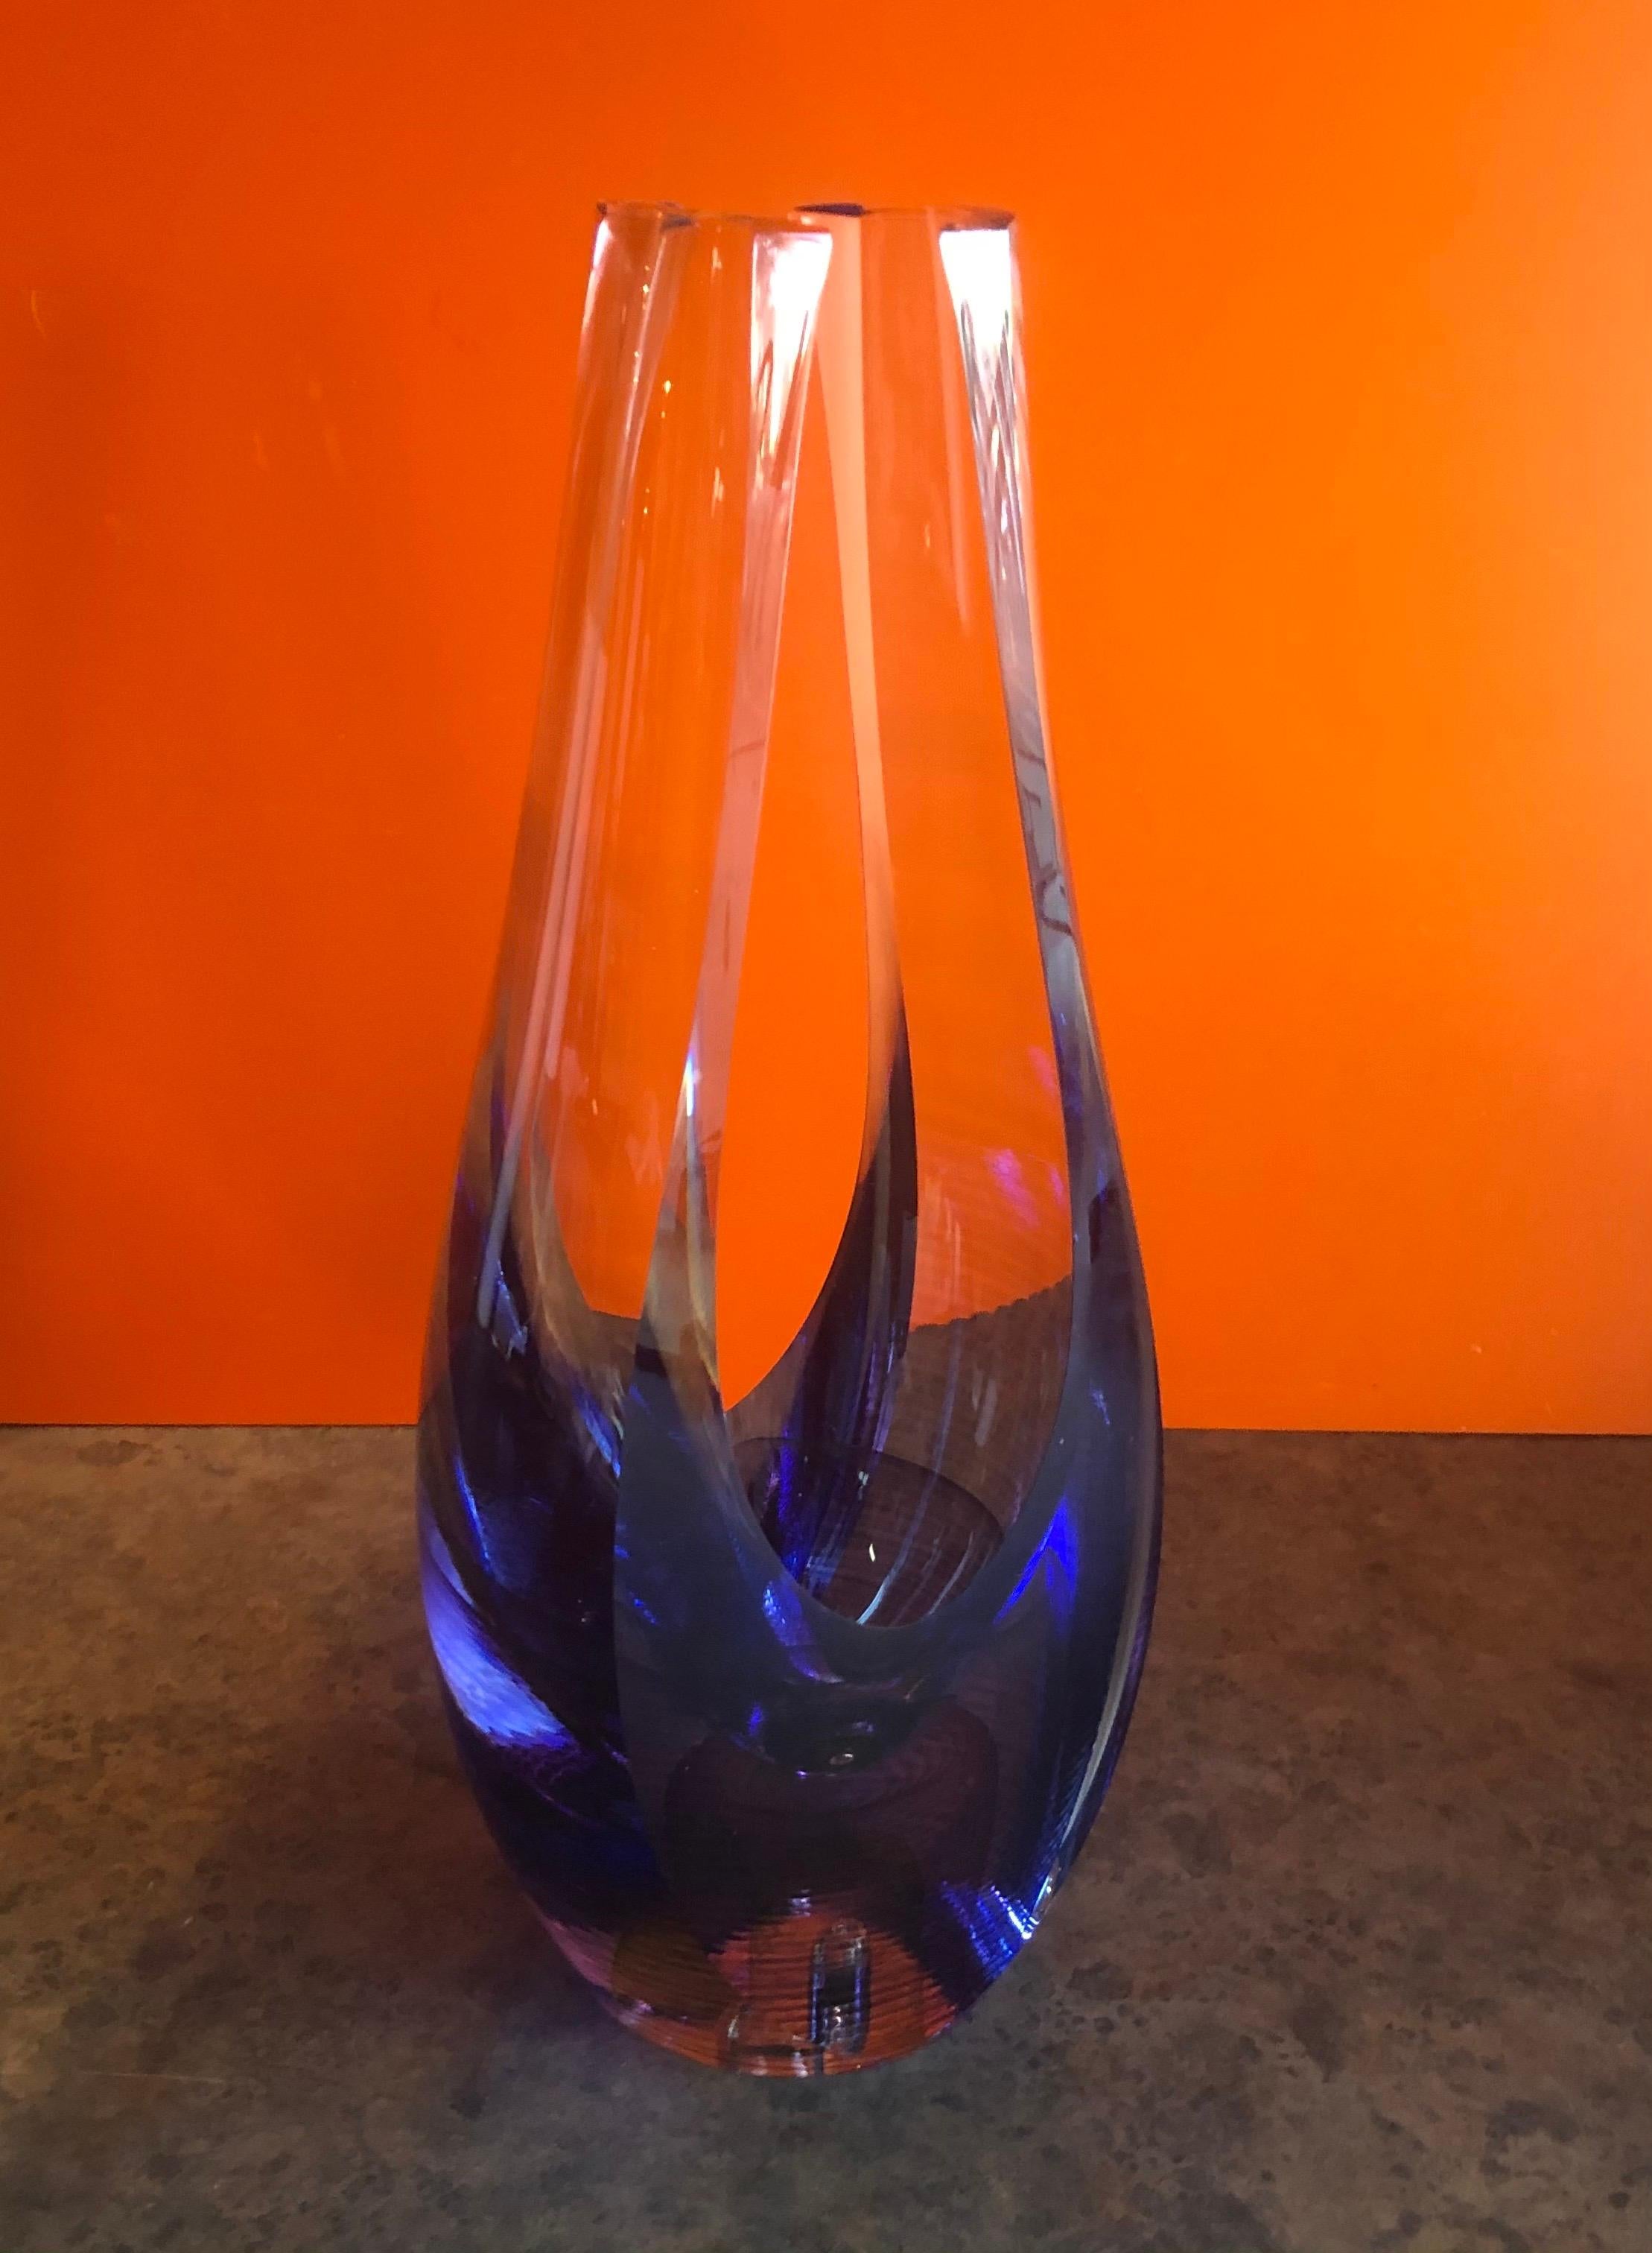 Contemporary art glass vase / sculpture by Kit Karbler & Michael David of Blake Street Glass Studio, circa 1990s. This original design is achieved by their technique of layering, threading, cutting and polishing hand blown glass, distinguished by